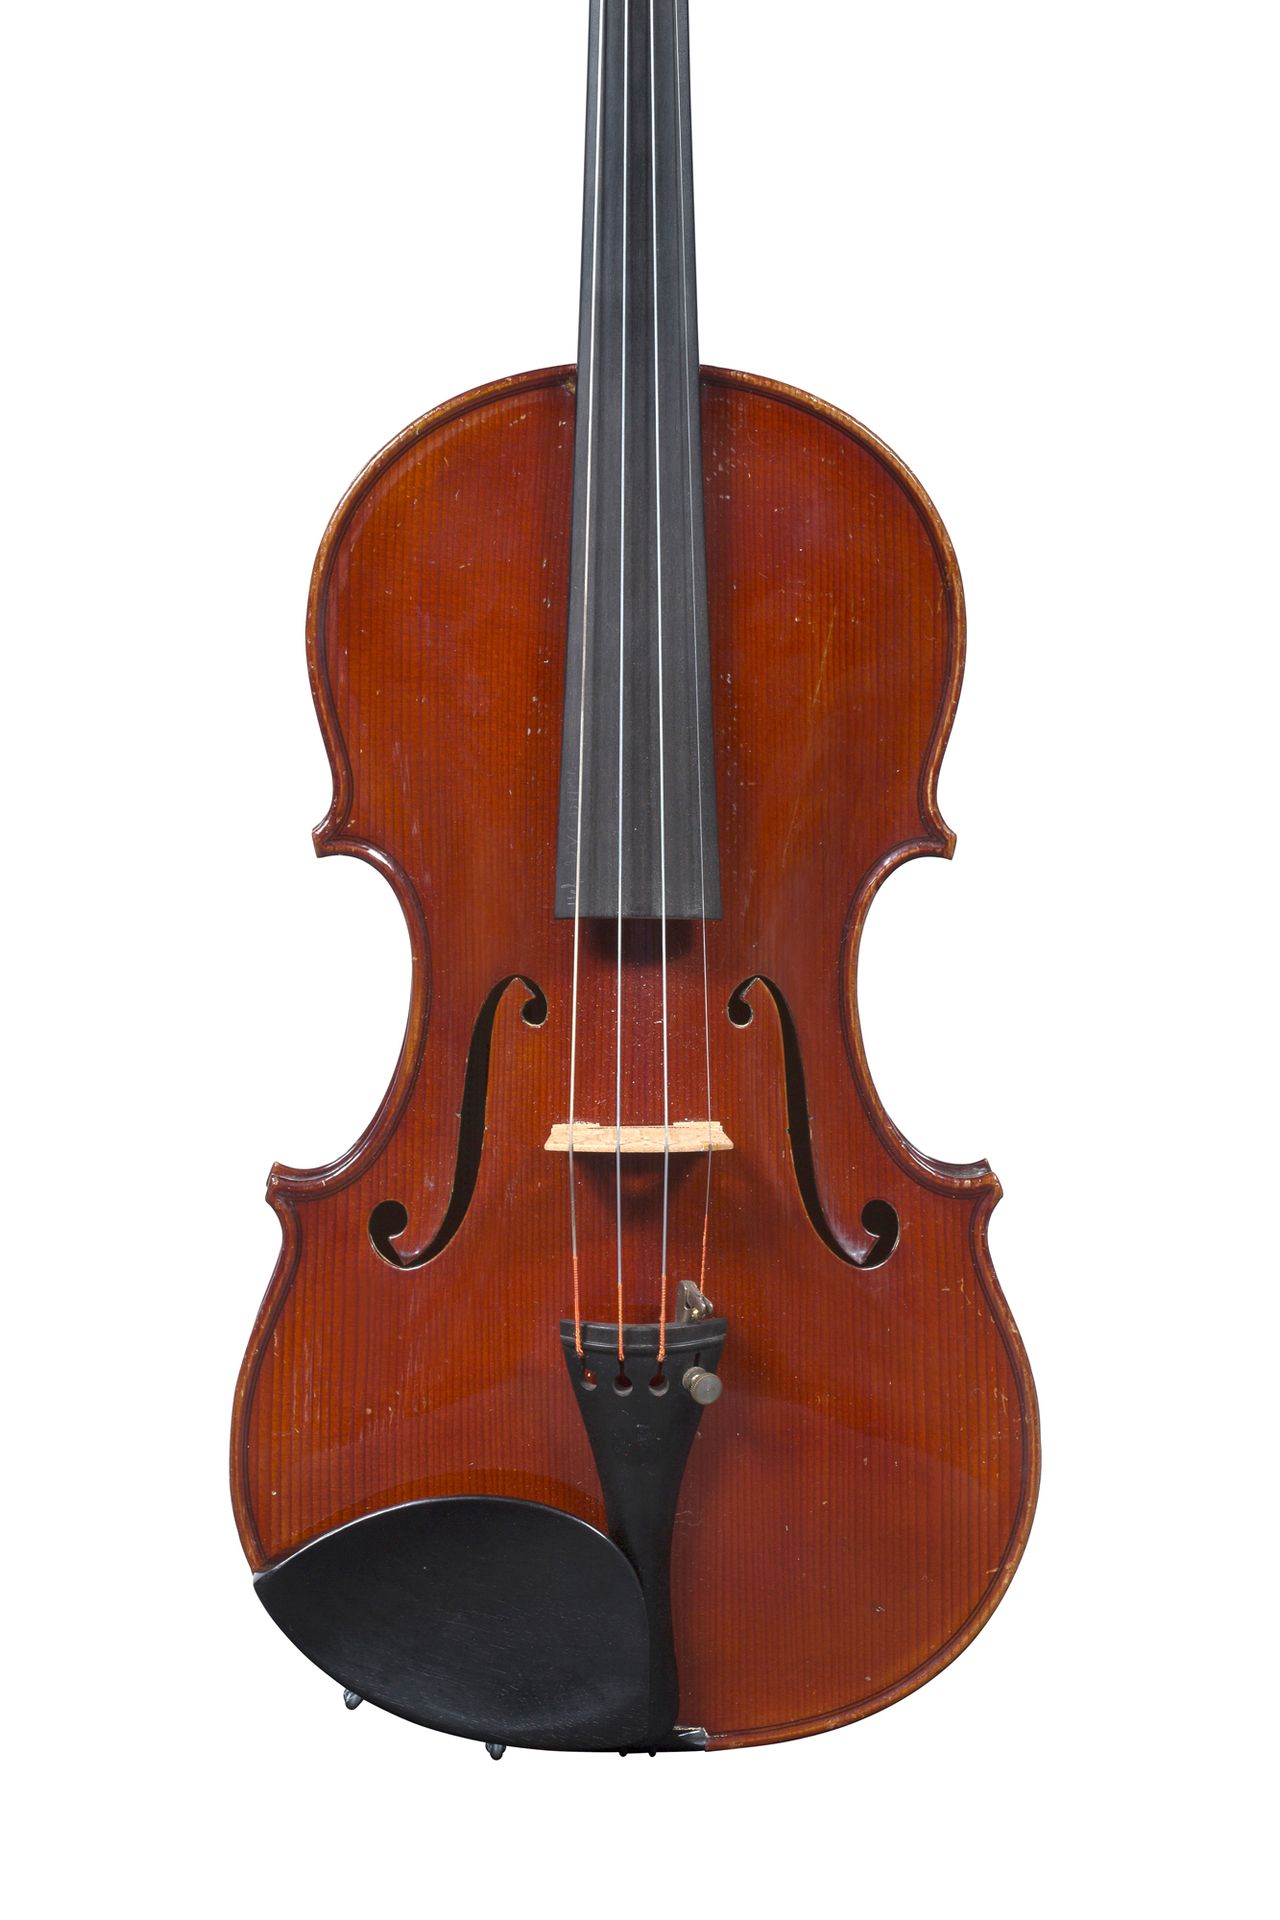 Null A French Violin by Charles Claudot, Mirecourt circa 1920-30